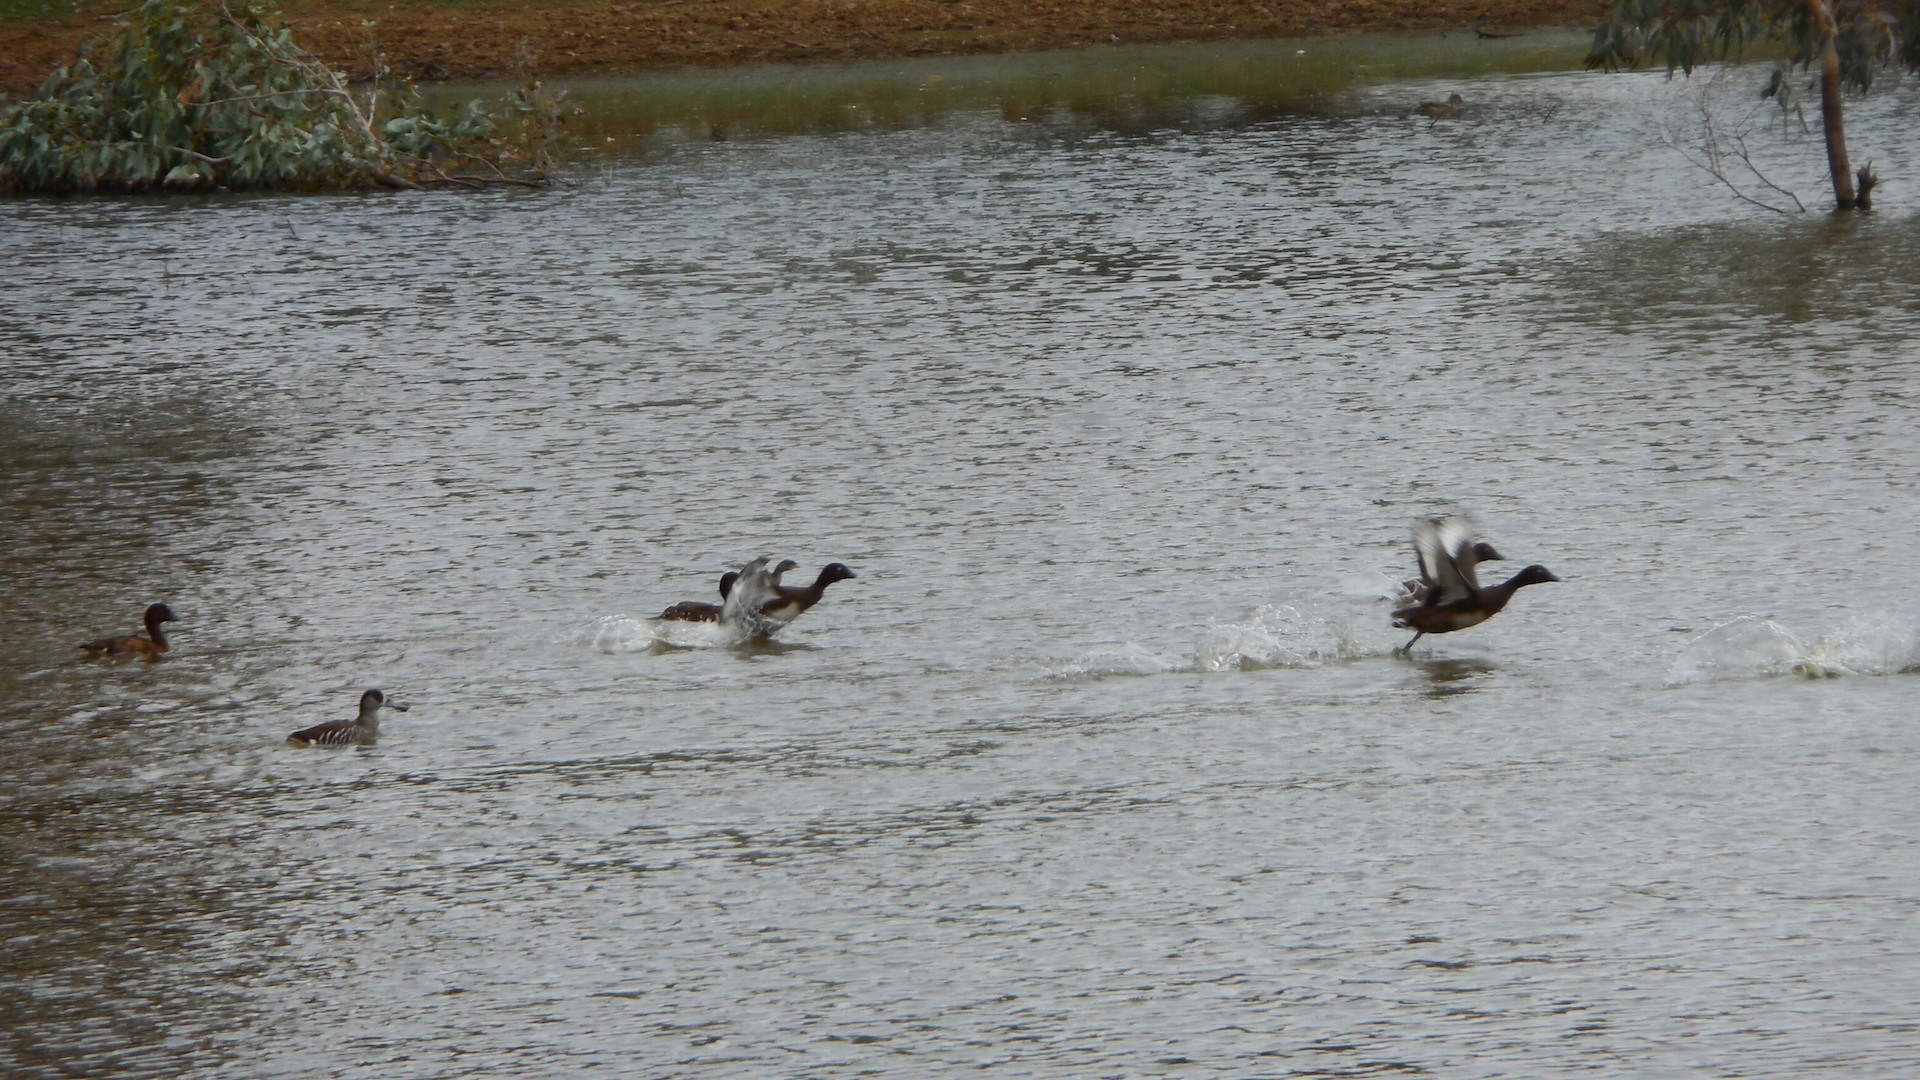 Ducks take off from the lagoon.